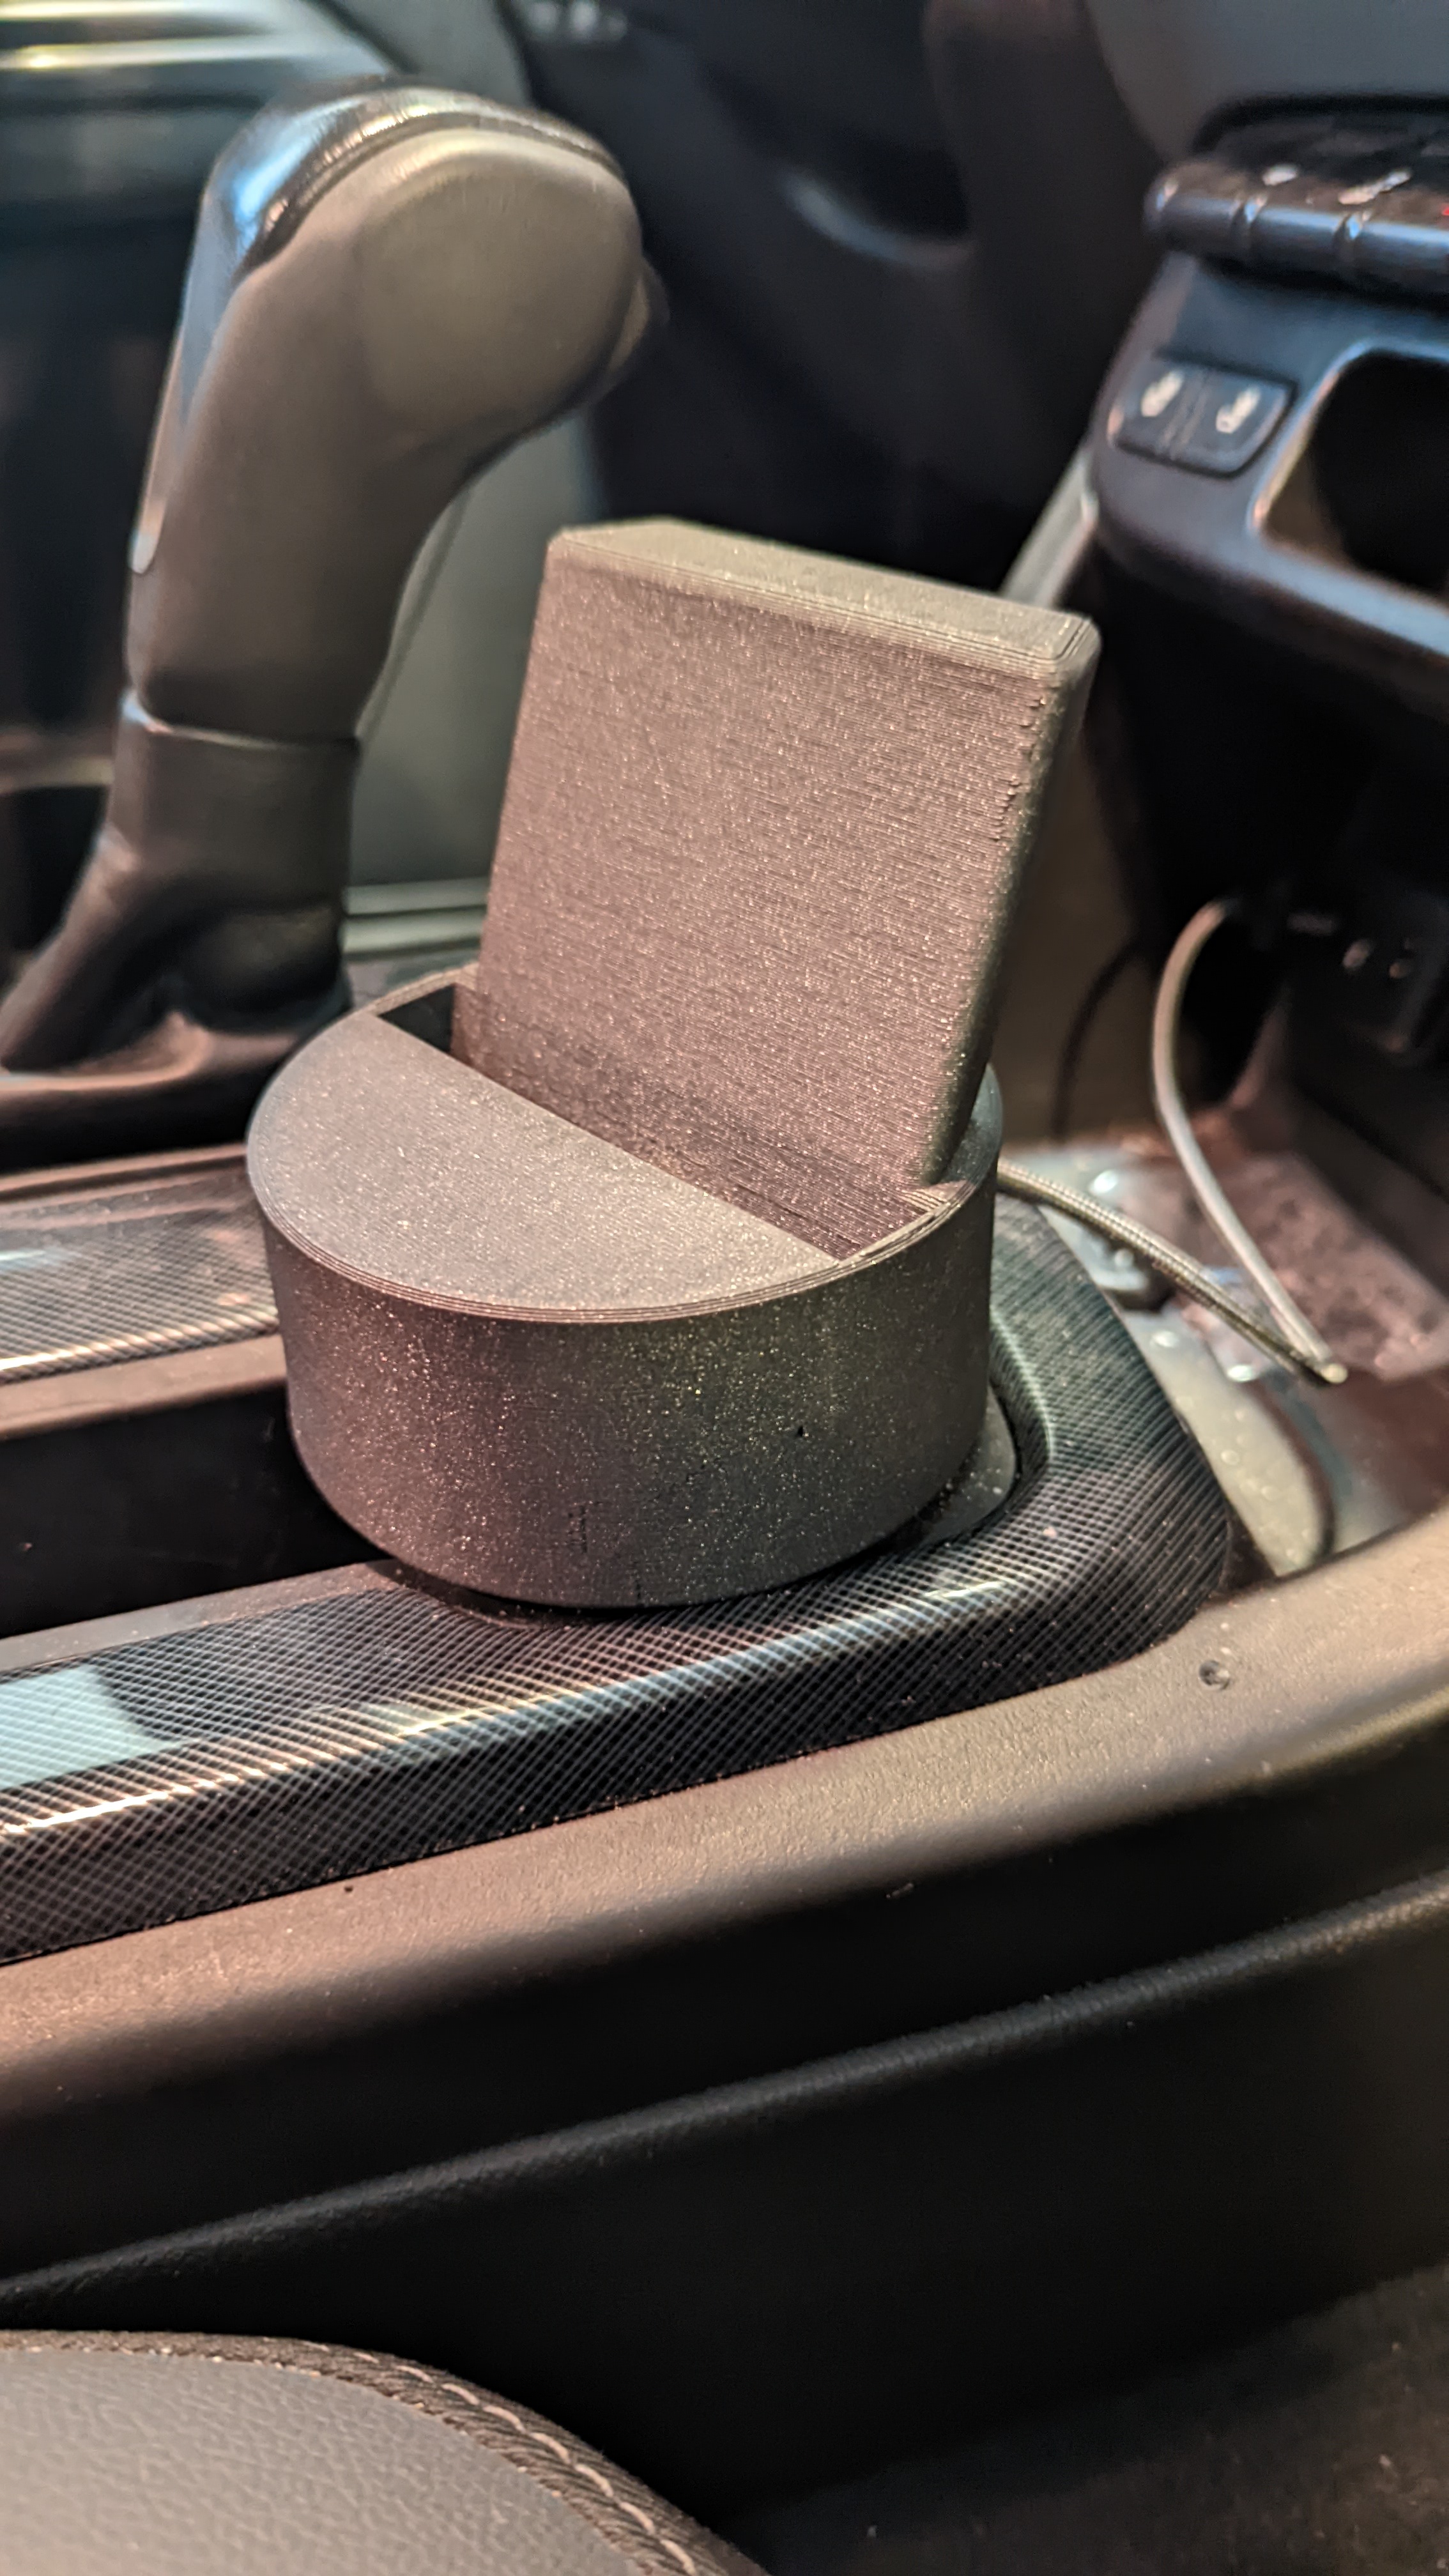 Phone cradle for cup holder